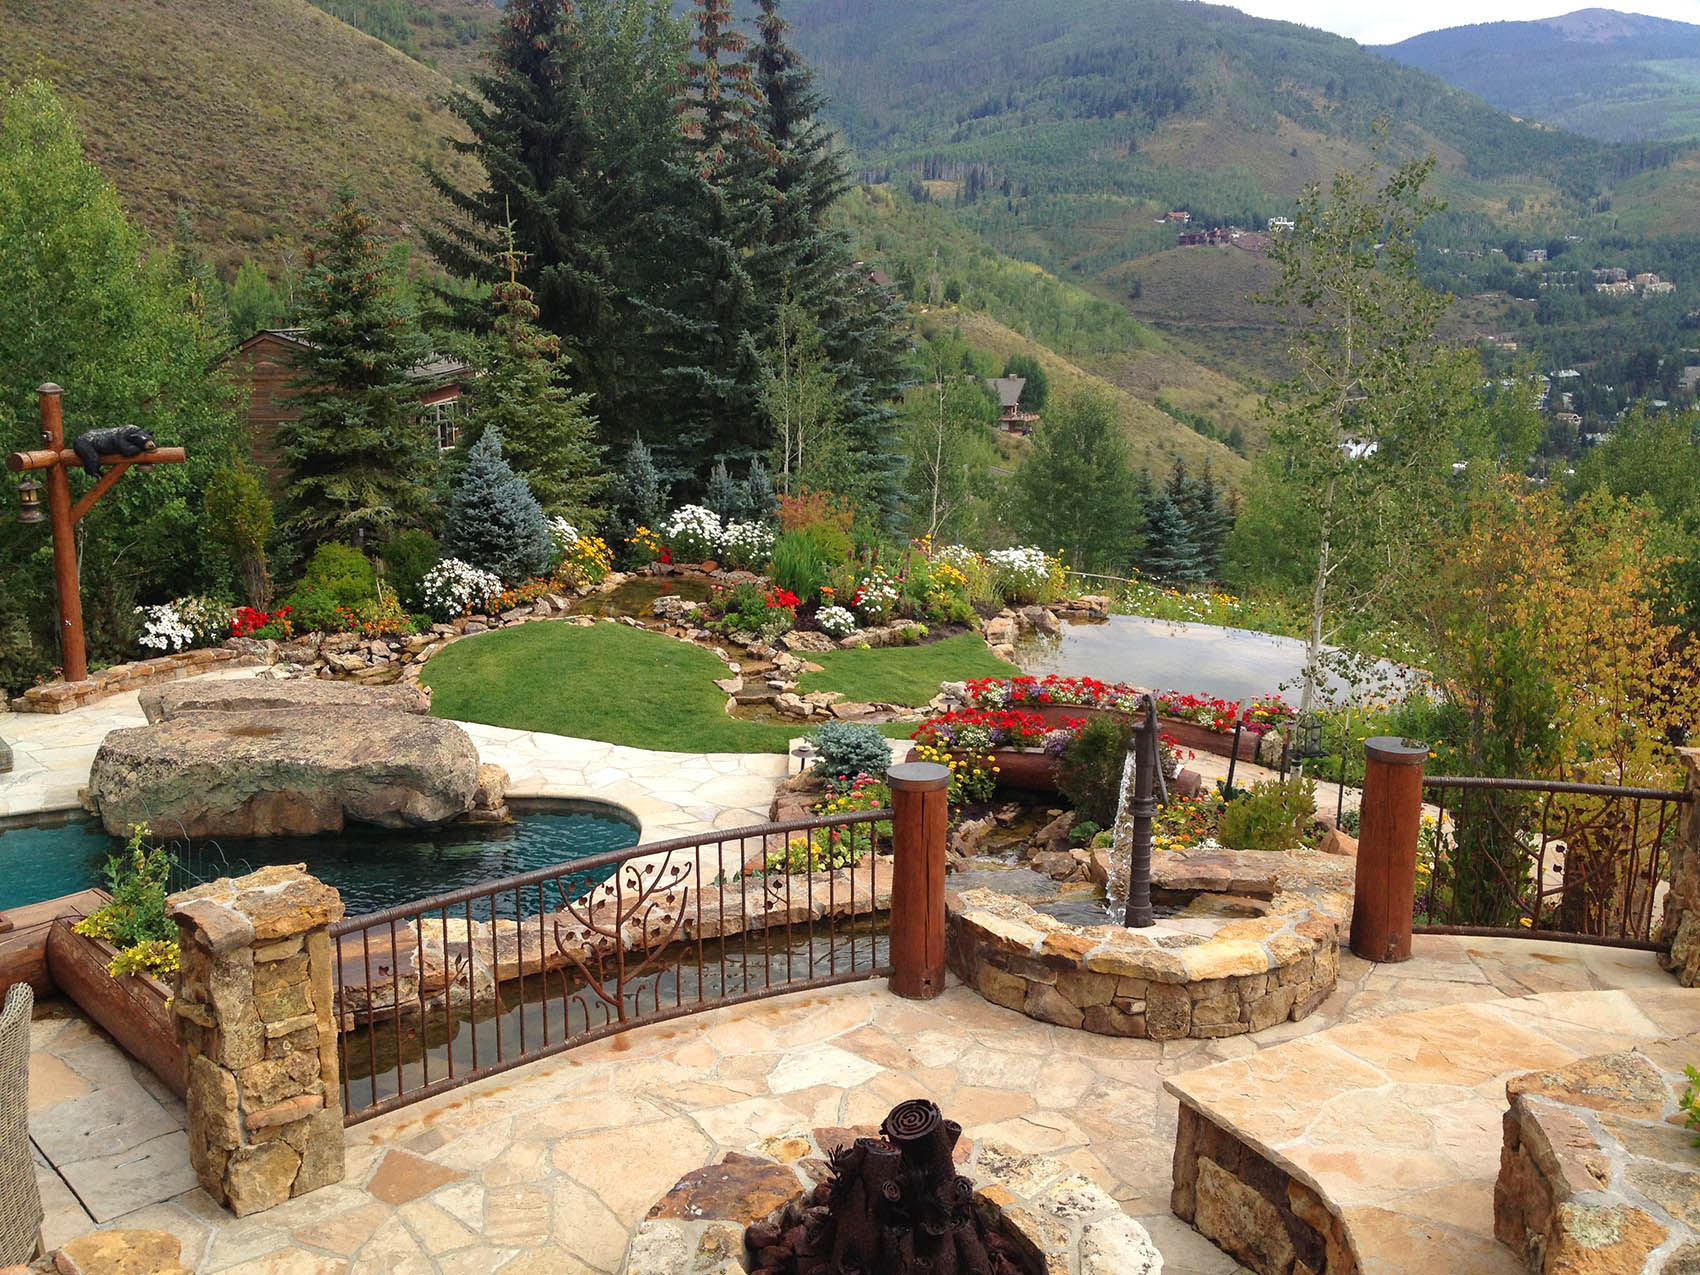 A luxurious backyard with a pool, hot tub, and lush landscaping overlooks a mountainous landscape. Stone pathways and vibrant flower beds enhance the scenic view.